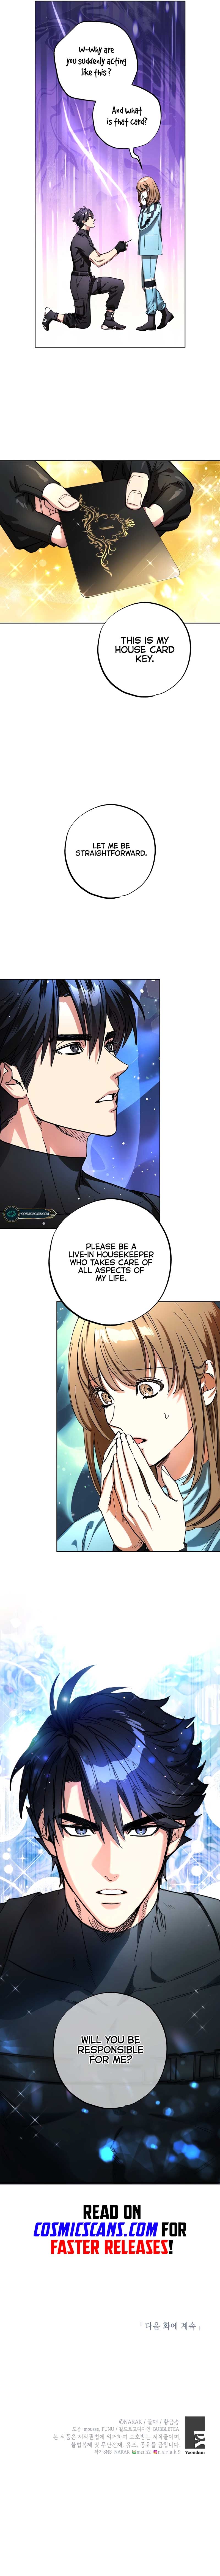 The Housekeeper in the Dungeon chapter 25